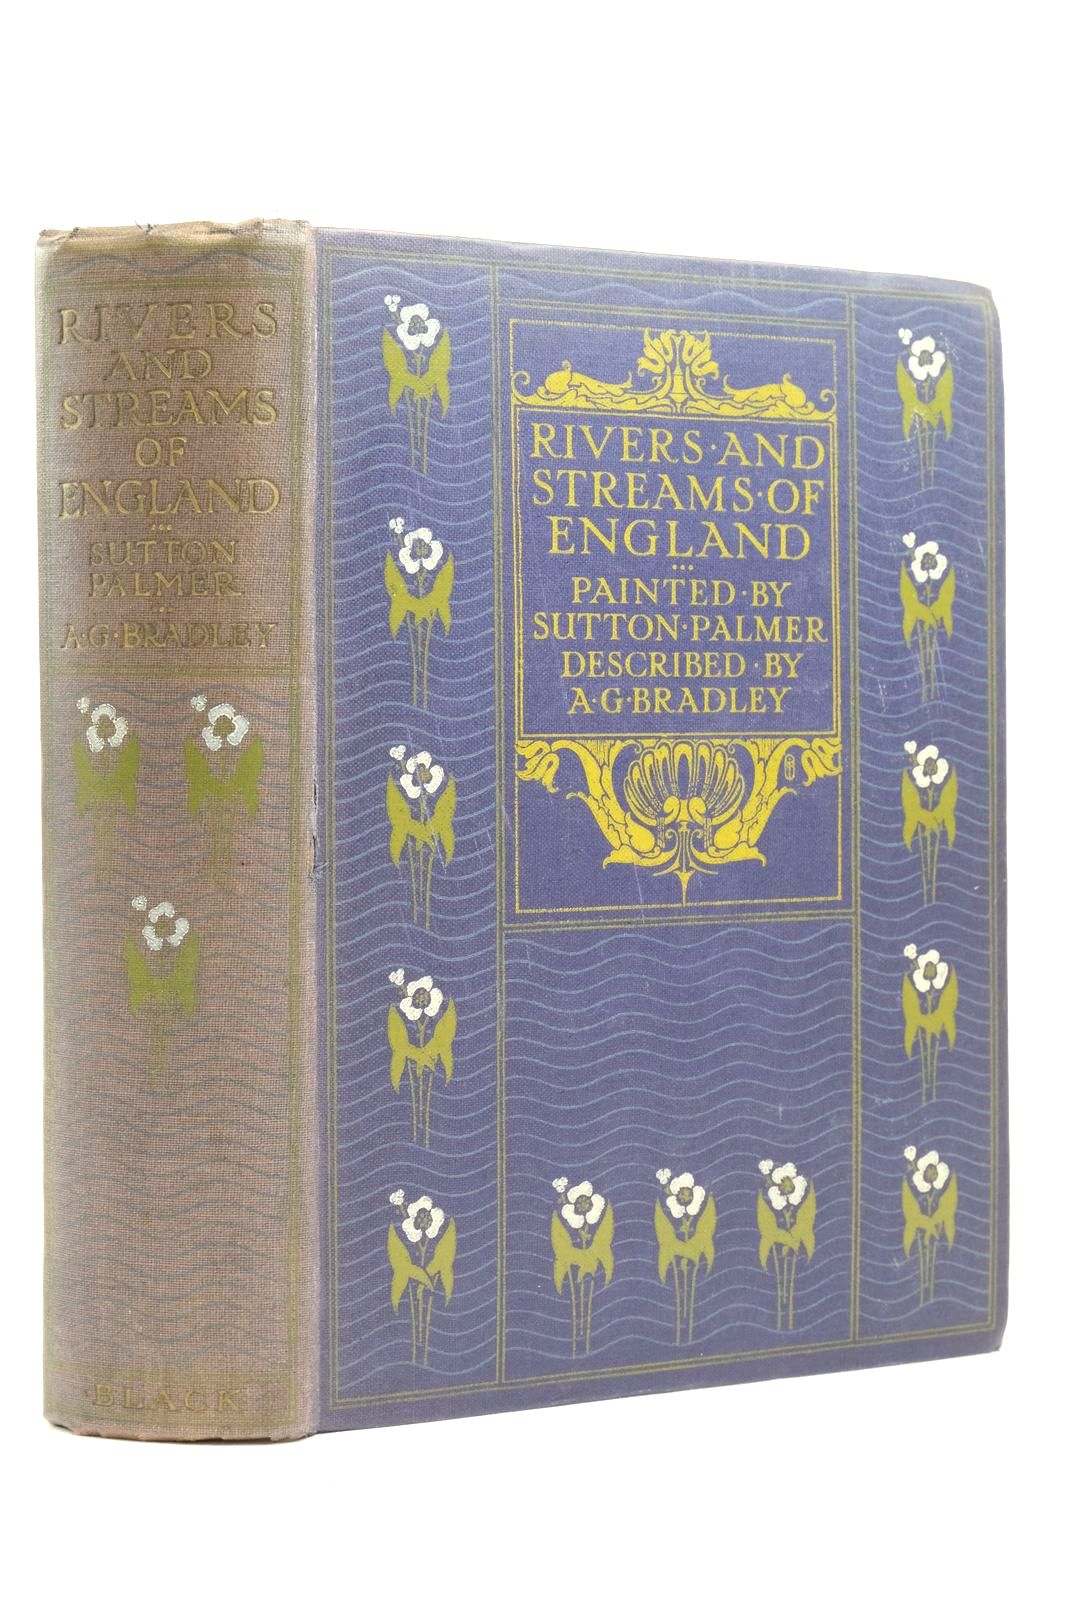 Photo of THE RIVERS AND STREAMS OF ENGLAND written by Bradley, A.G. illustrated by Palmer, Sutton published by Adam &amp; Charles Black (STOCK CODE: 2137586)  for sale by Stella & Rose's Books